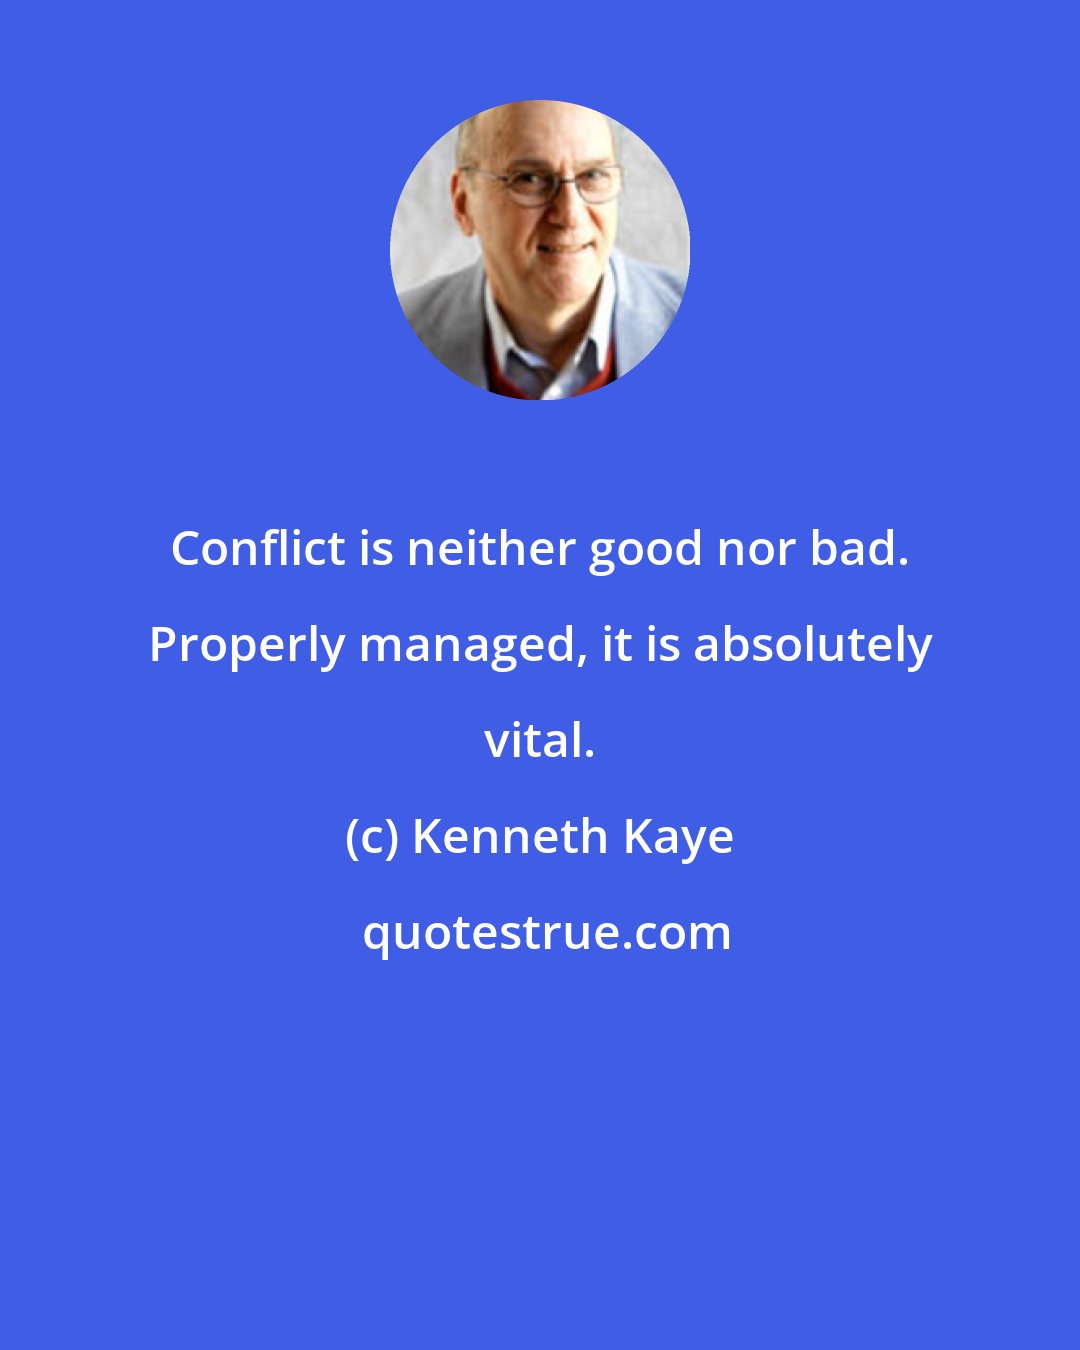 Kenneth Kaye: Conflict is neither good nor bad. Properly managed, it is absolutely vital.